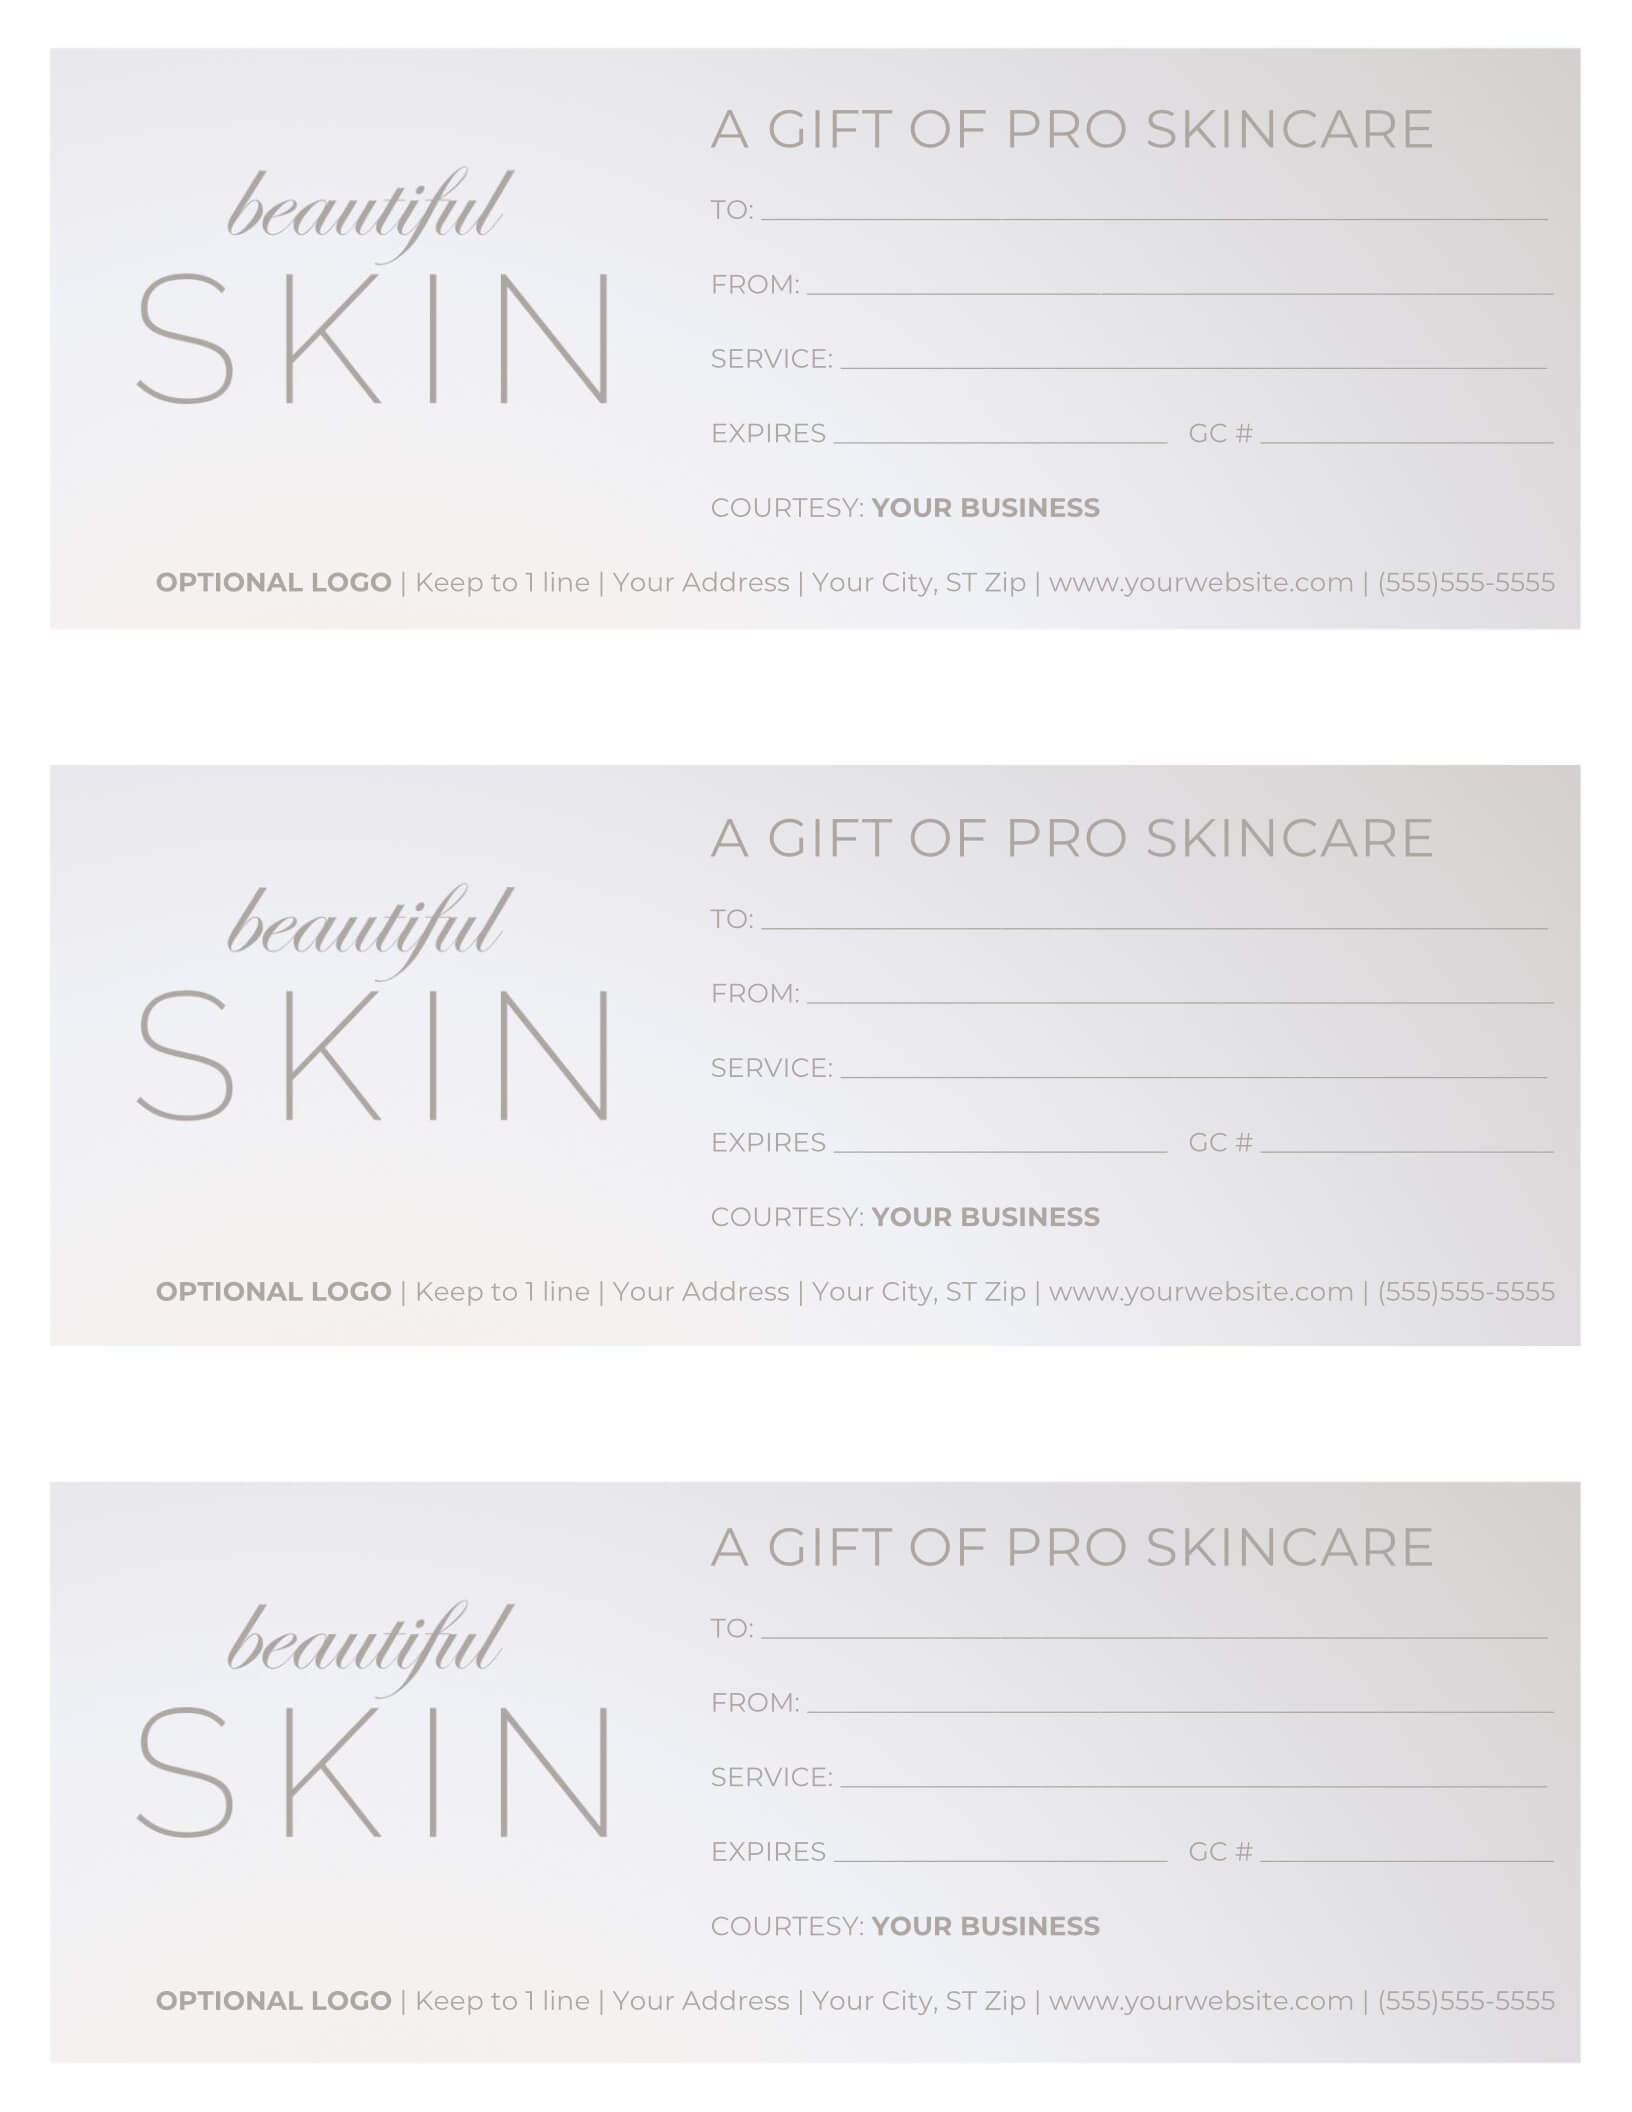 Free Gift Certificate Templates For Massage And Spa Throughout Gift Certificate Log Template